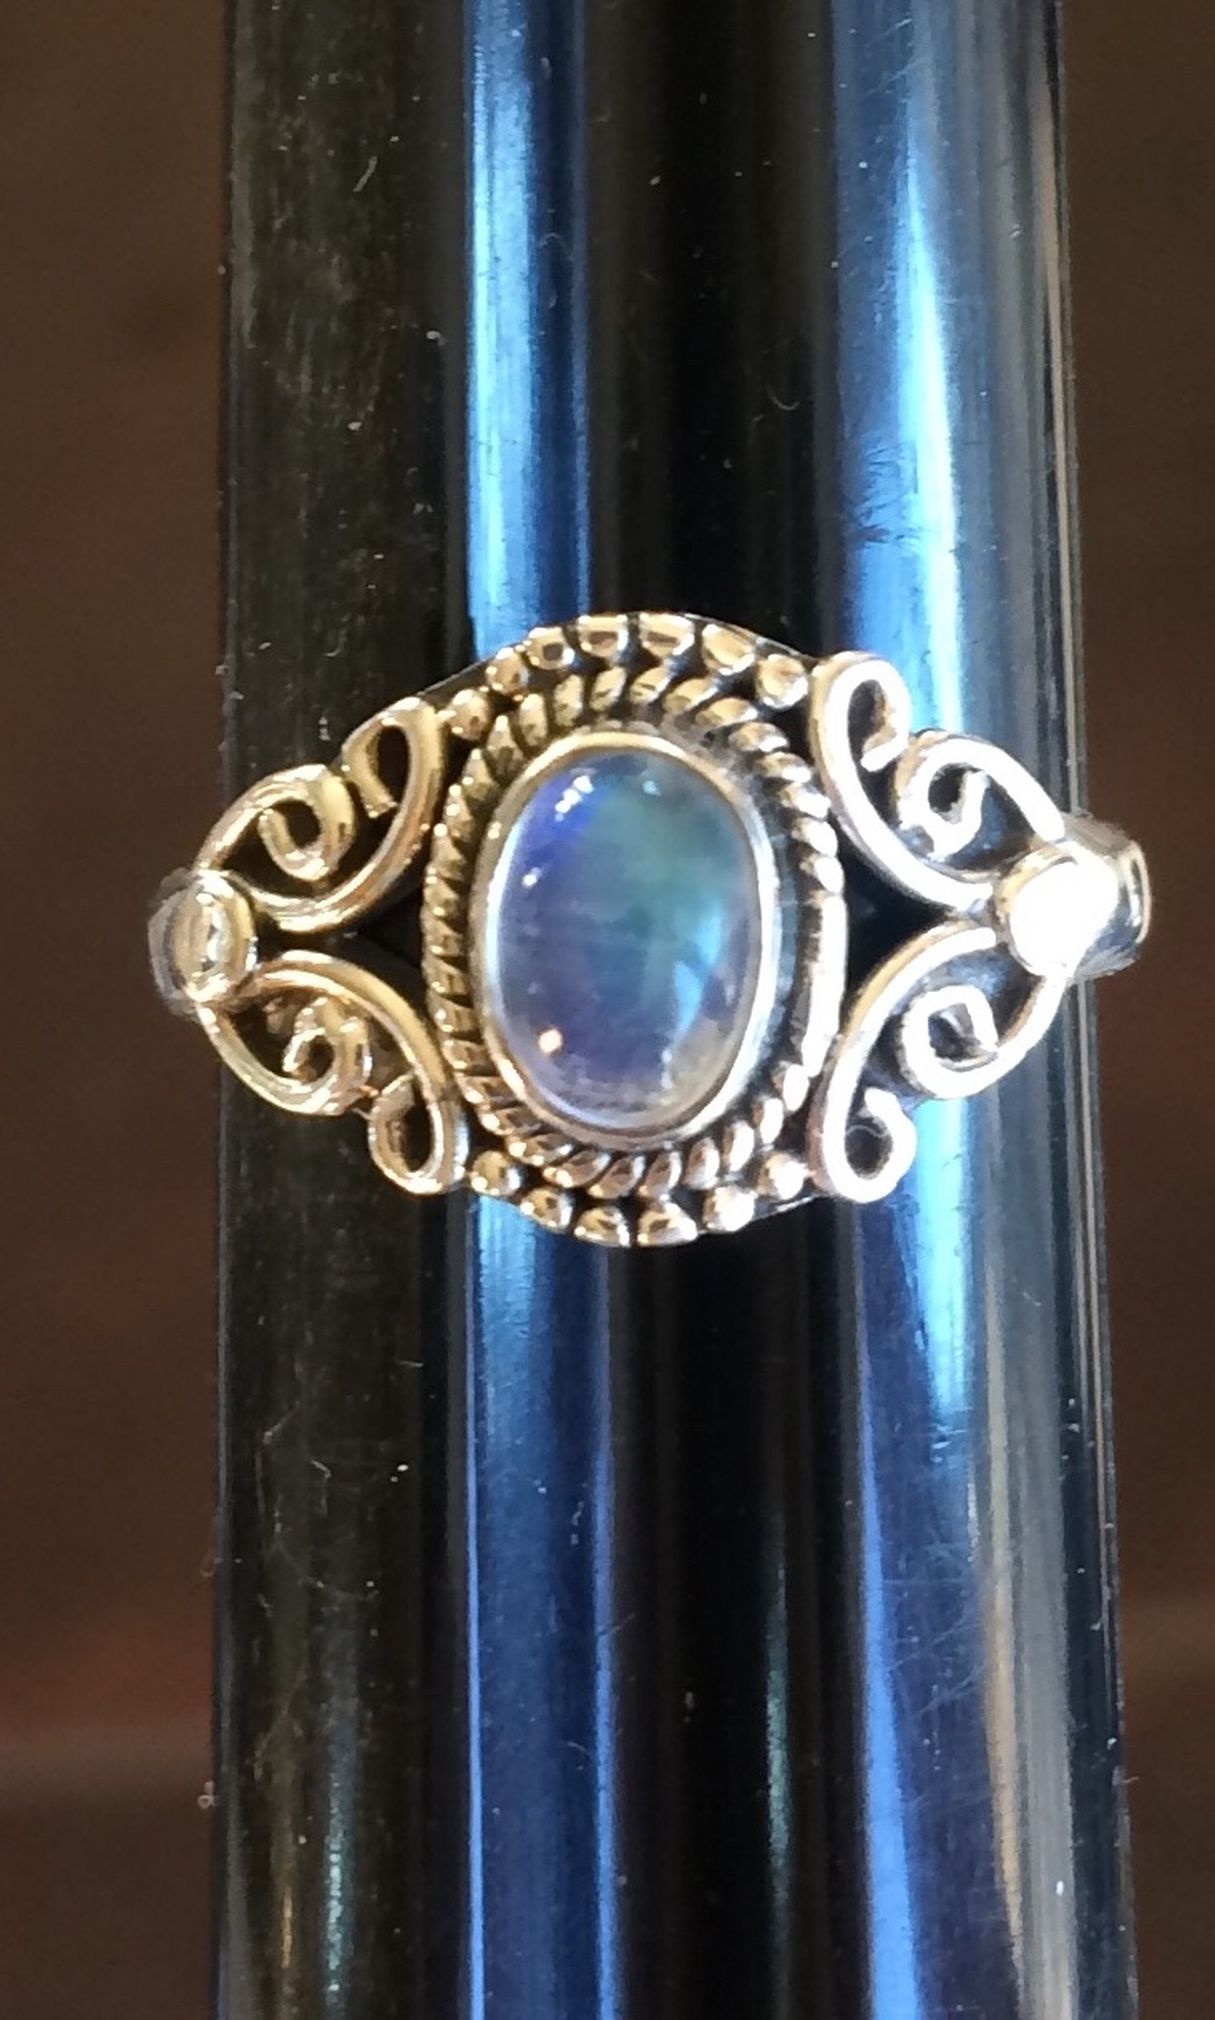 New - Rainbow Moonstone 925 Sterling Silver Ring - Size 7.75